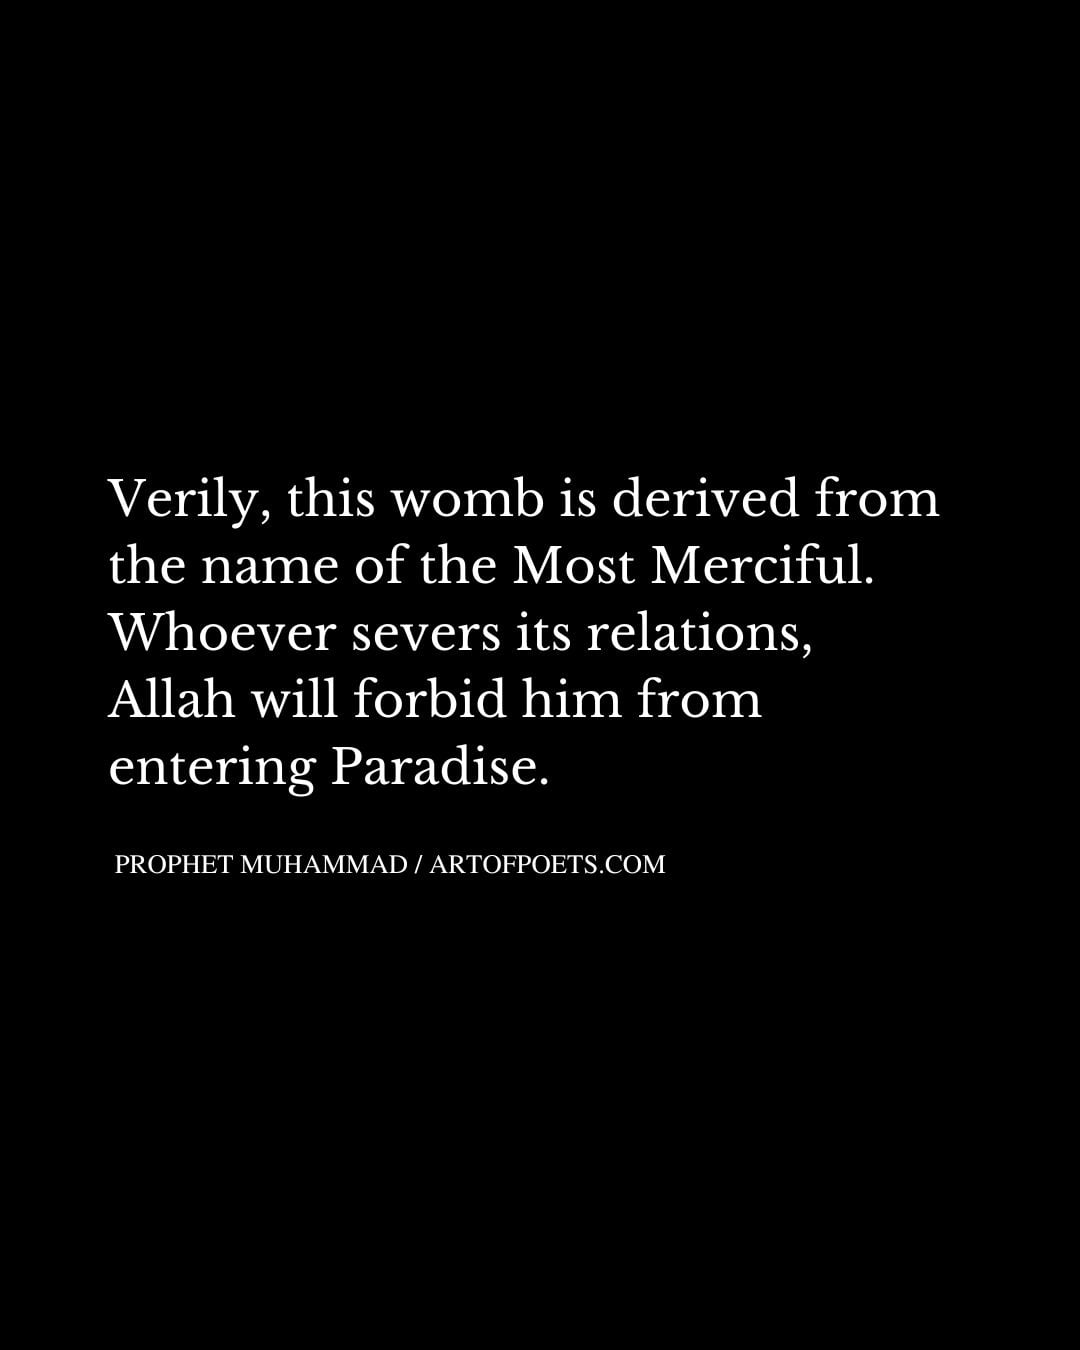 Verily this womb is derived from the name of the Most Merciful. Whoever severs its relations Allah will forbid him from entering Paradise